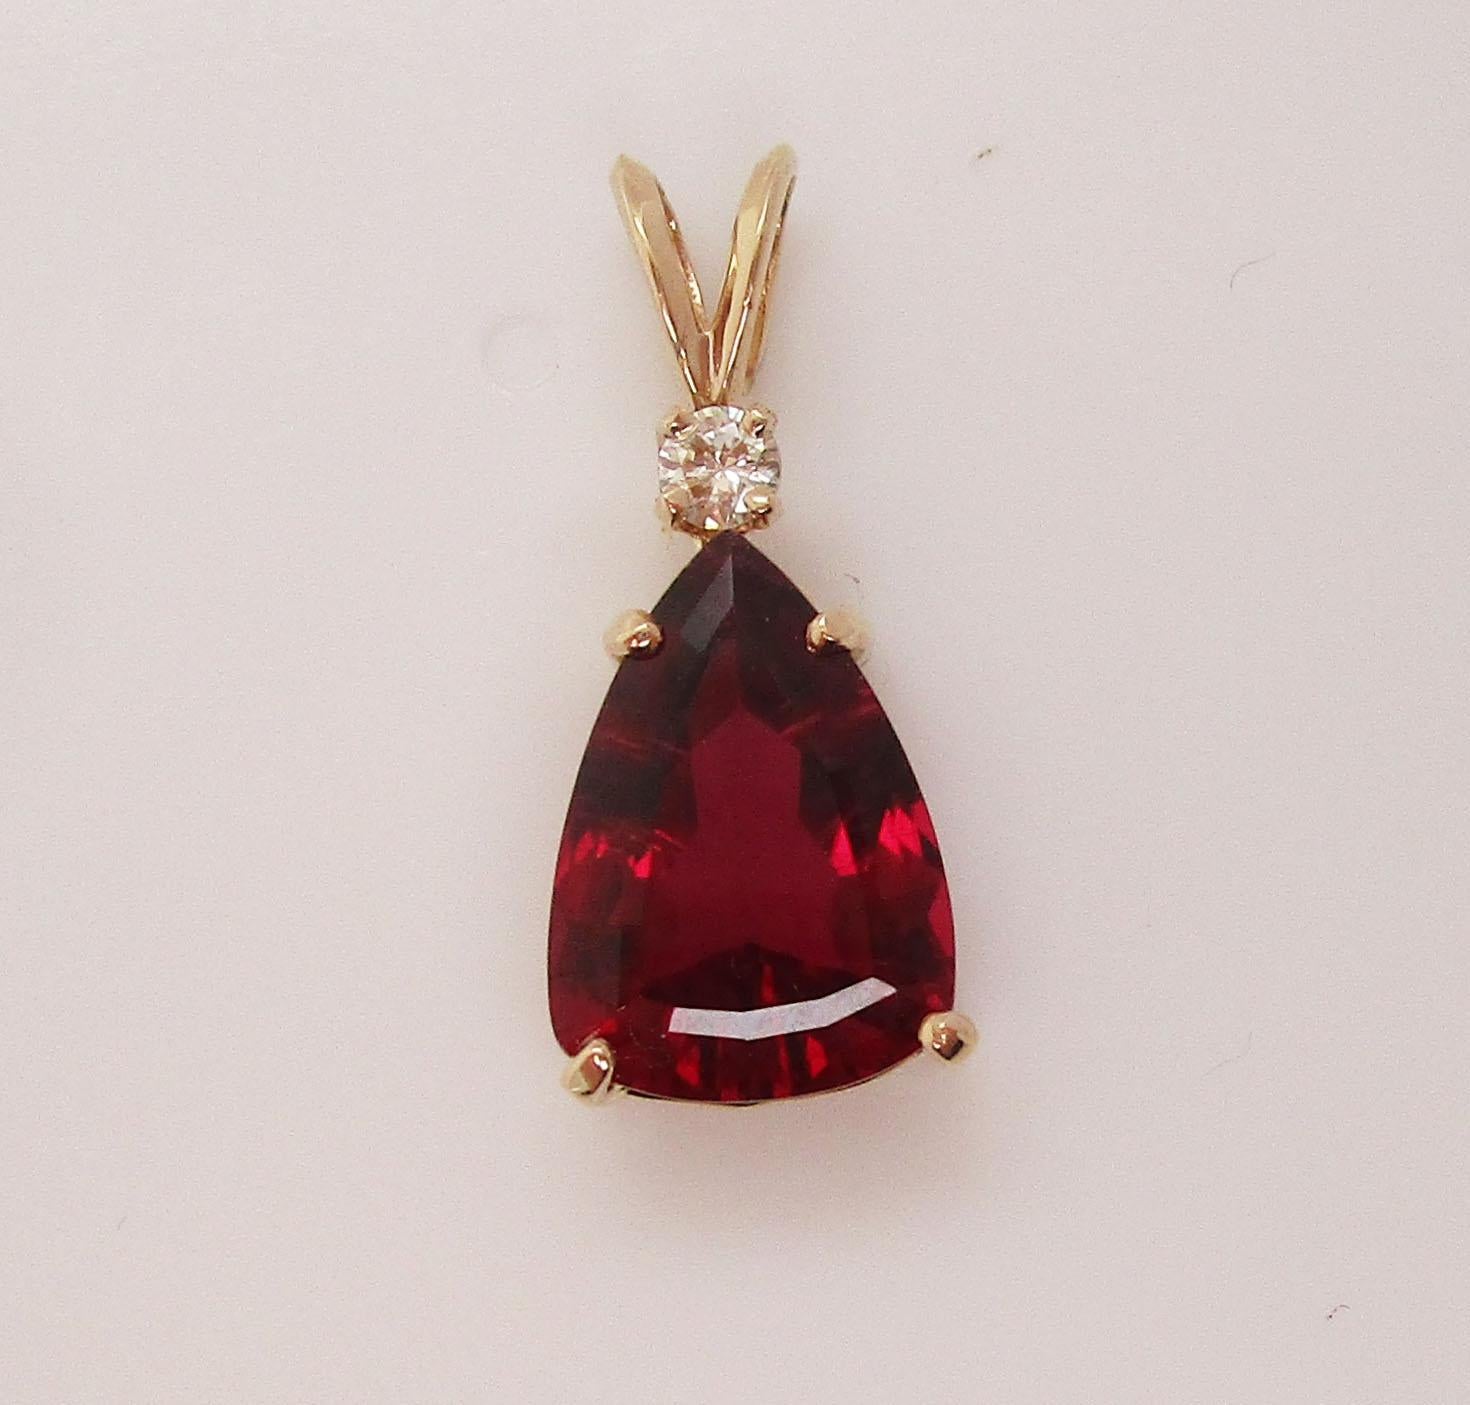 This is an absolutely gorgeous mid-century 18k yellow gold pendant with a stunning, deep red rubellite center and bright white diamond accent! The pendant has a beautiful tear drop shape that is unique and serves as the perfect frame for the